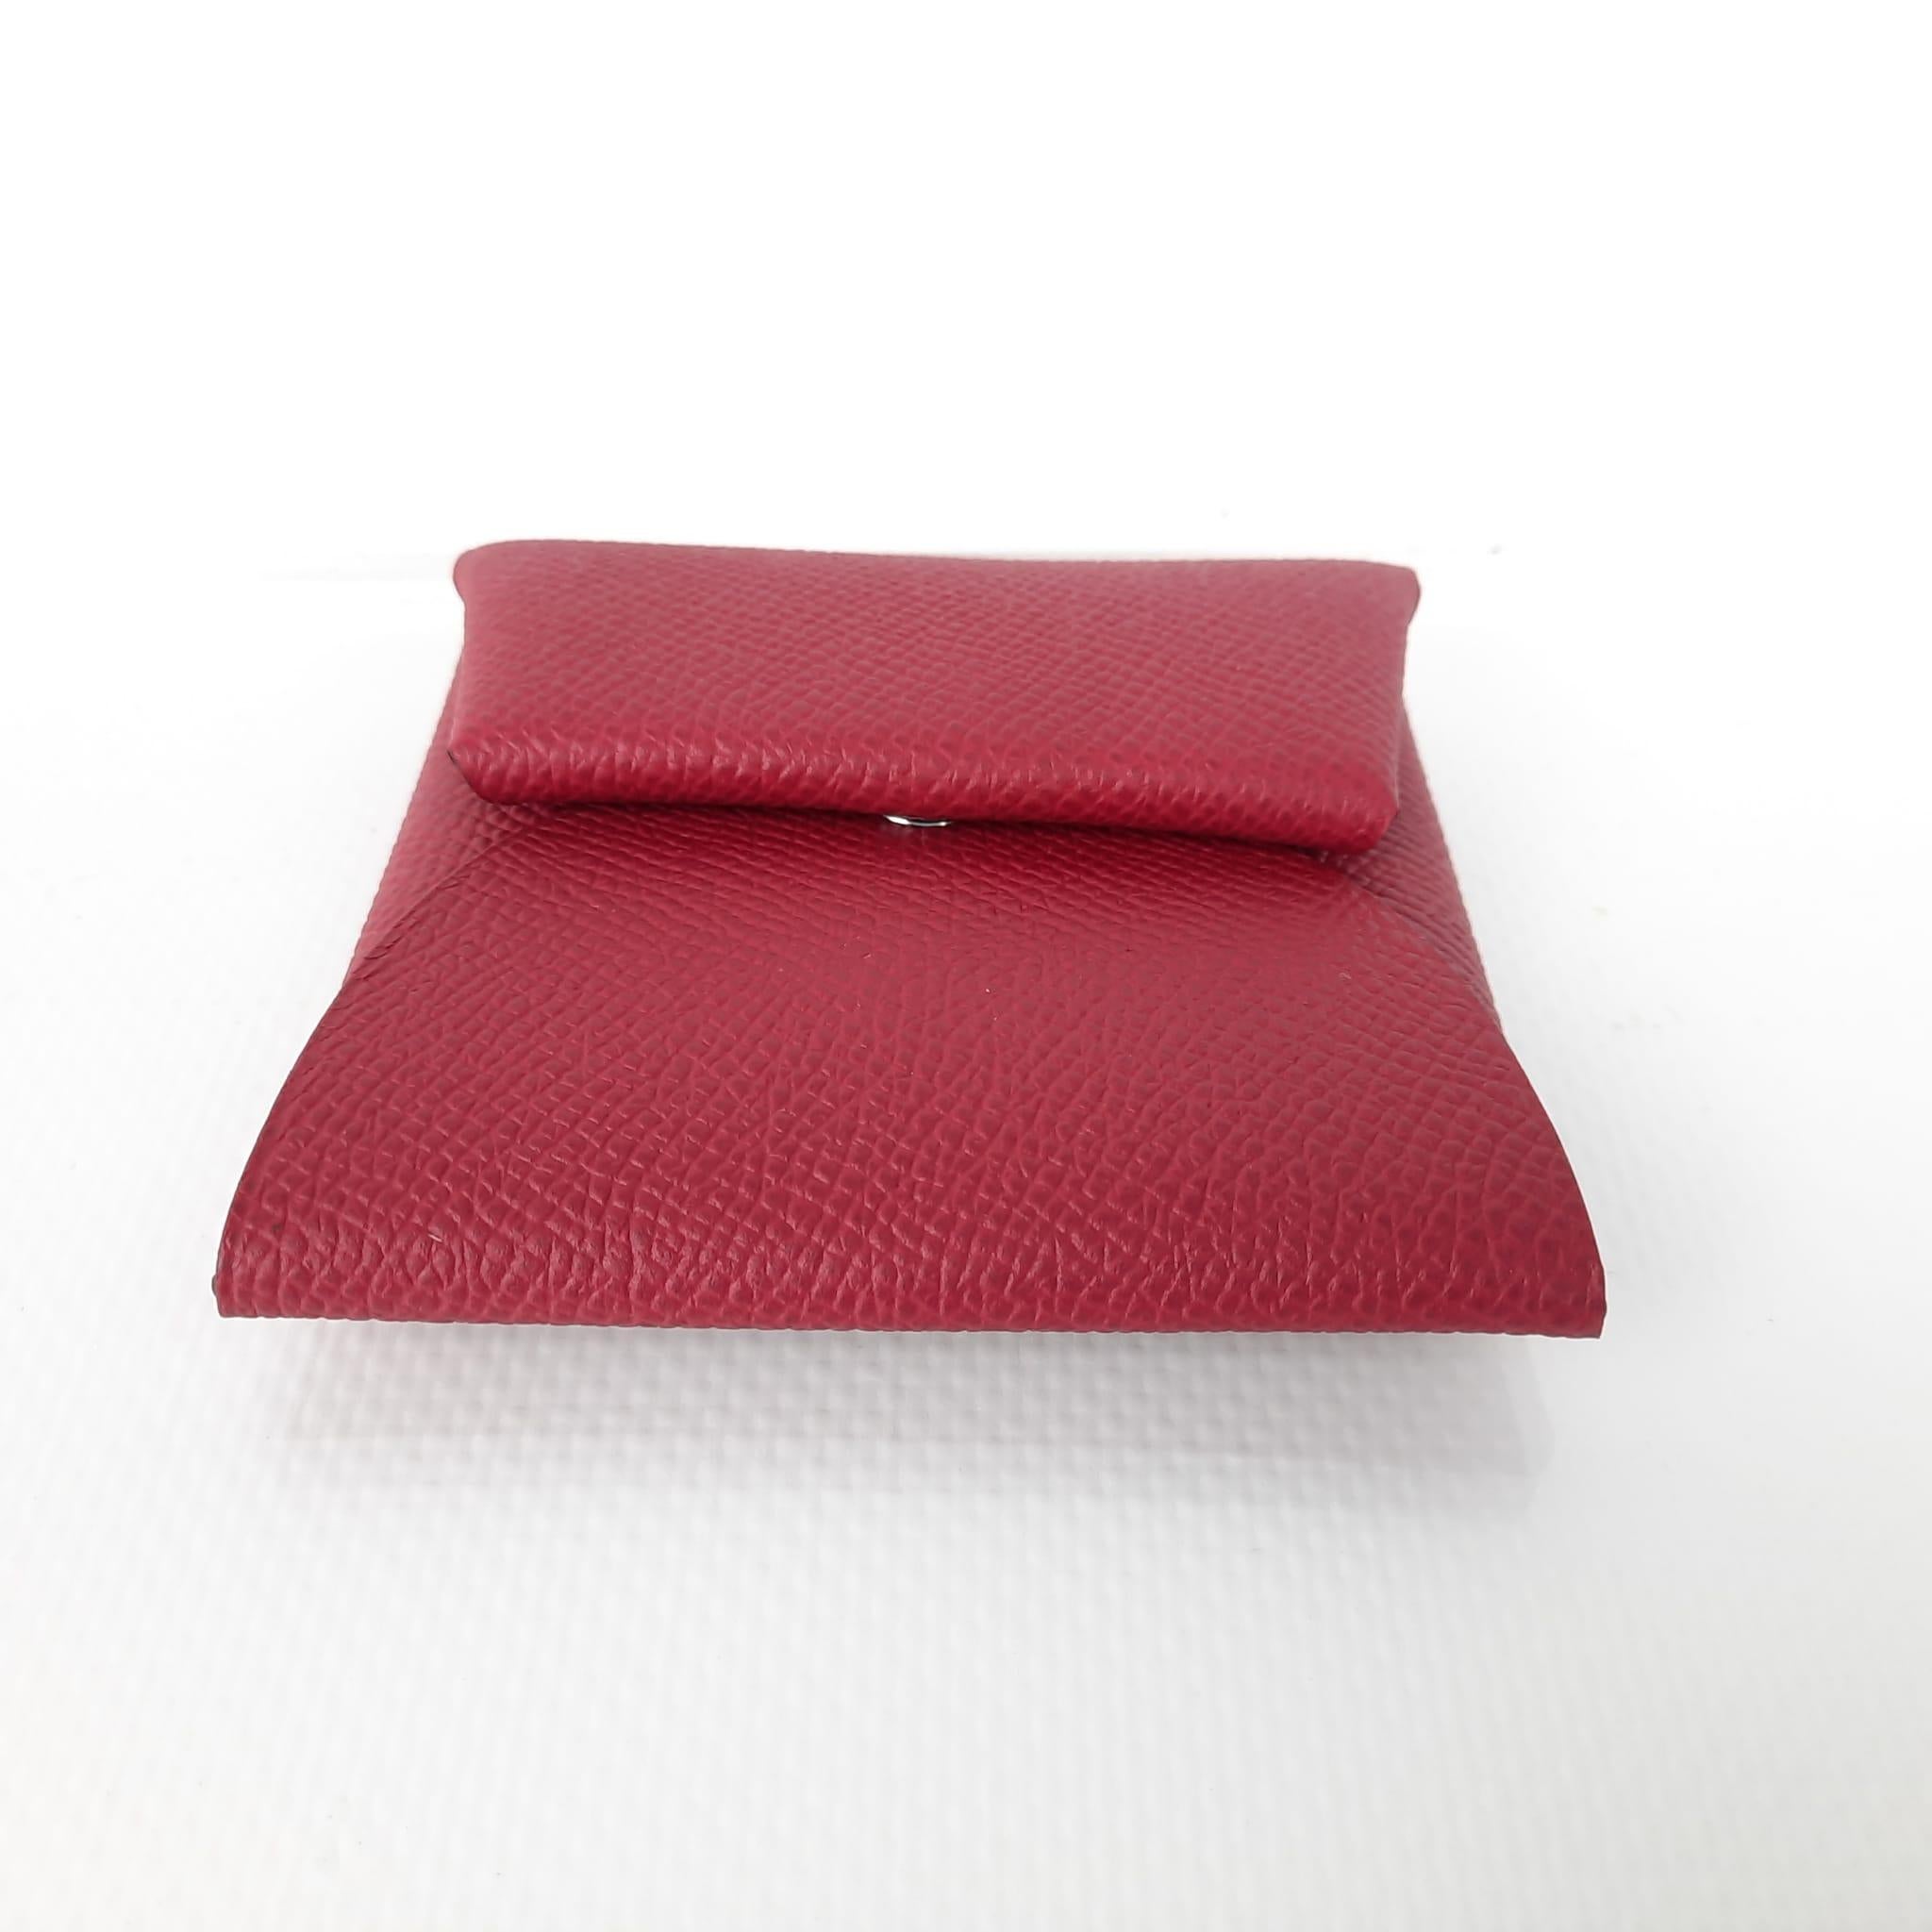 Hermès Bastia Wallet In New Condition For Sale In Nicosia, CY